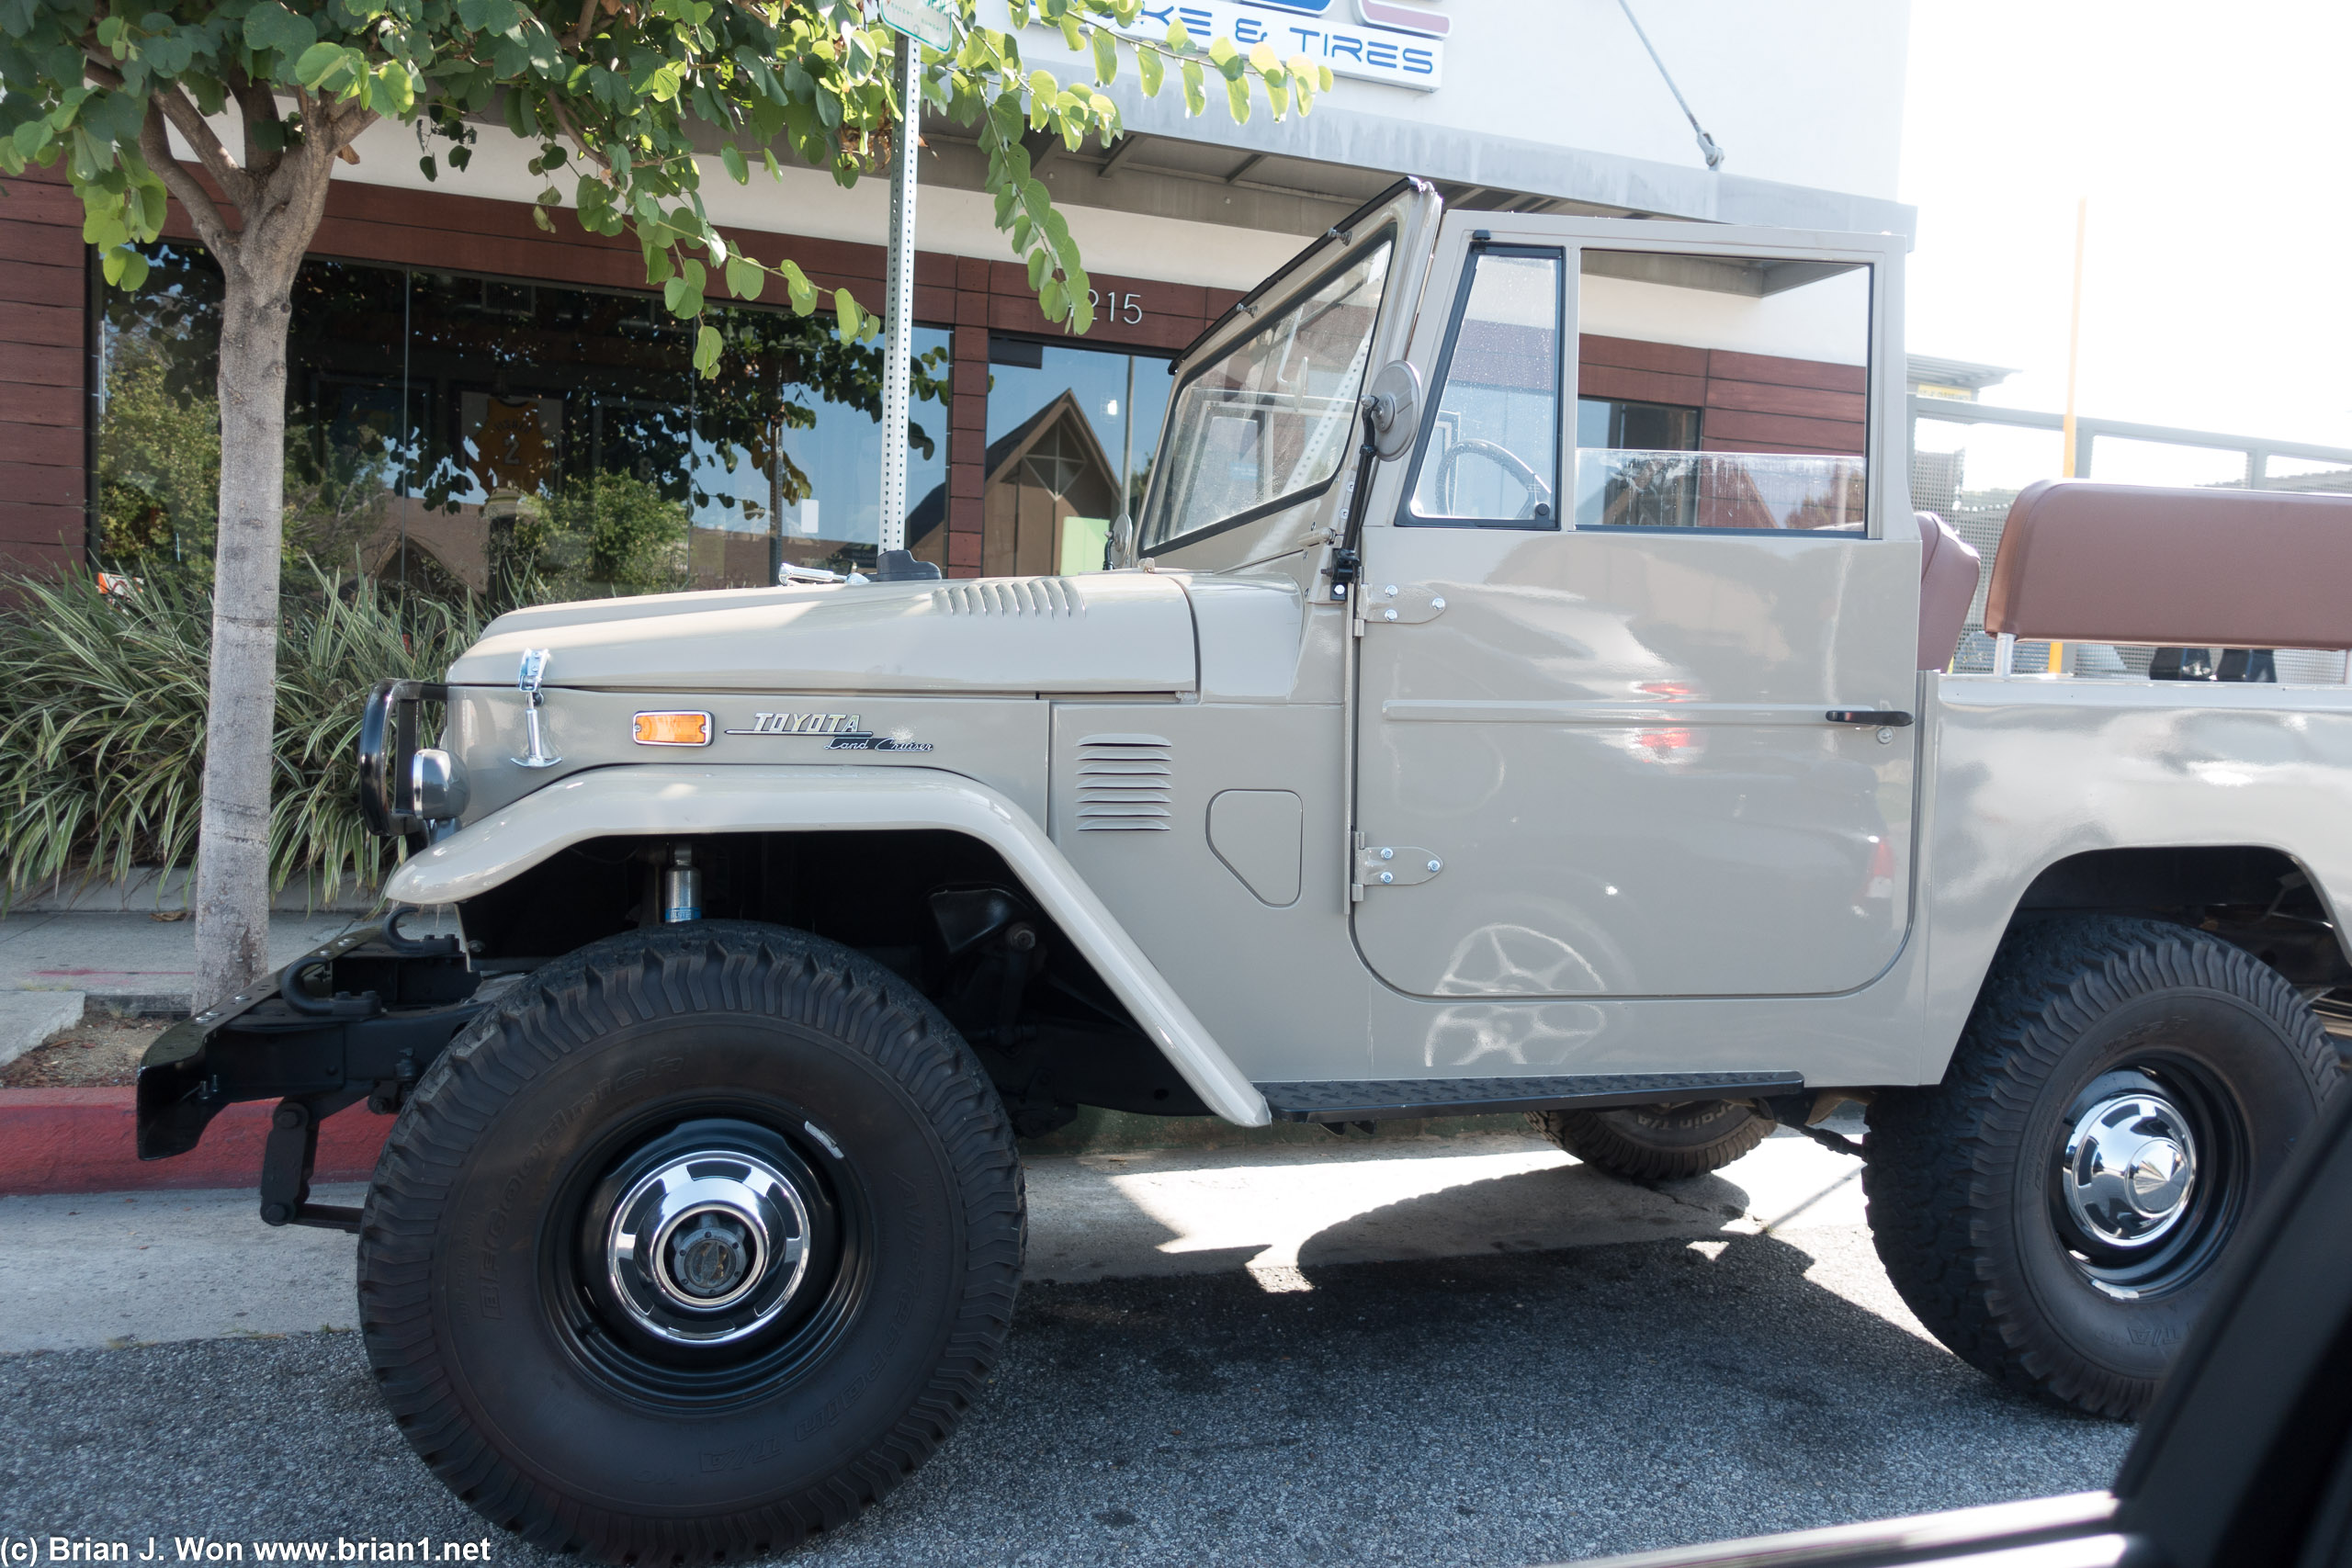 Immaculate vintage Toyota Land Cruiser.